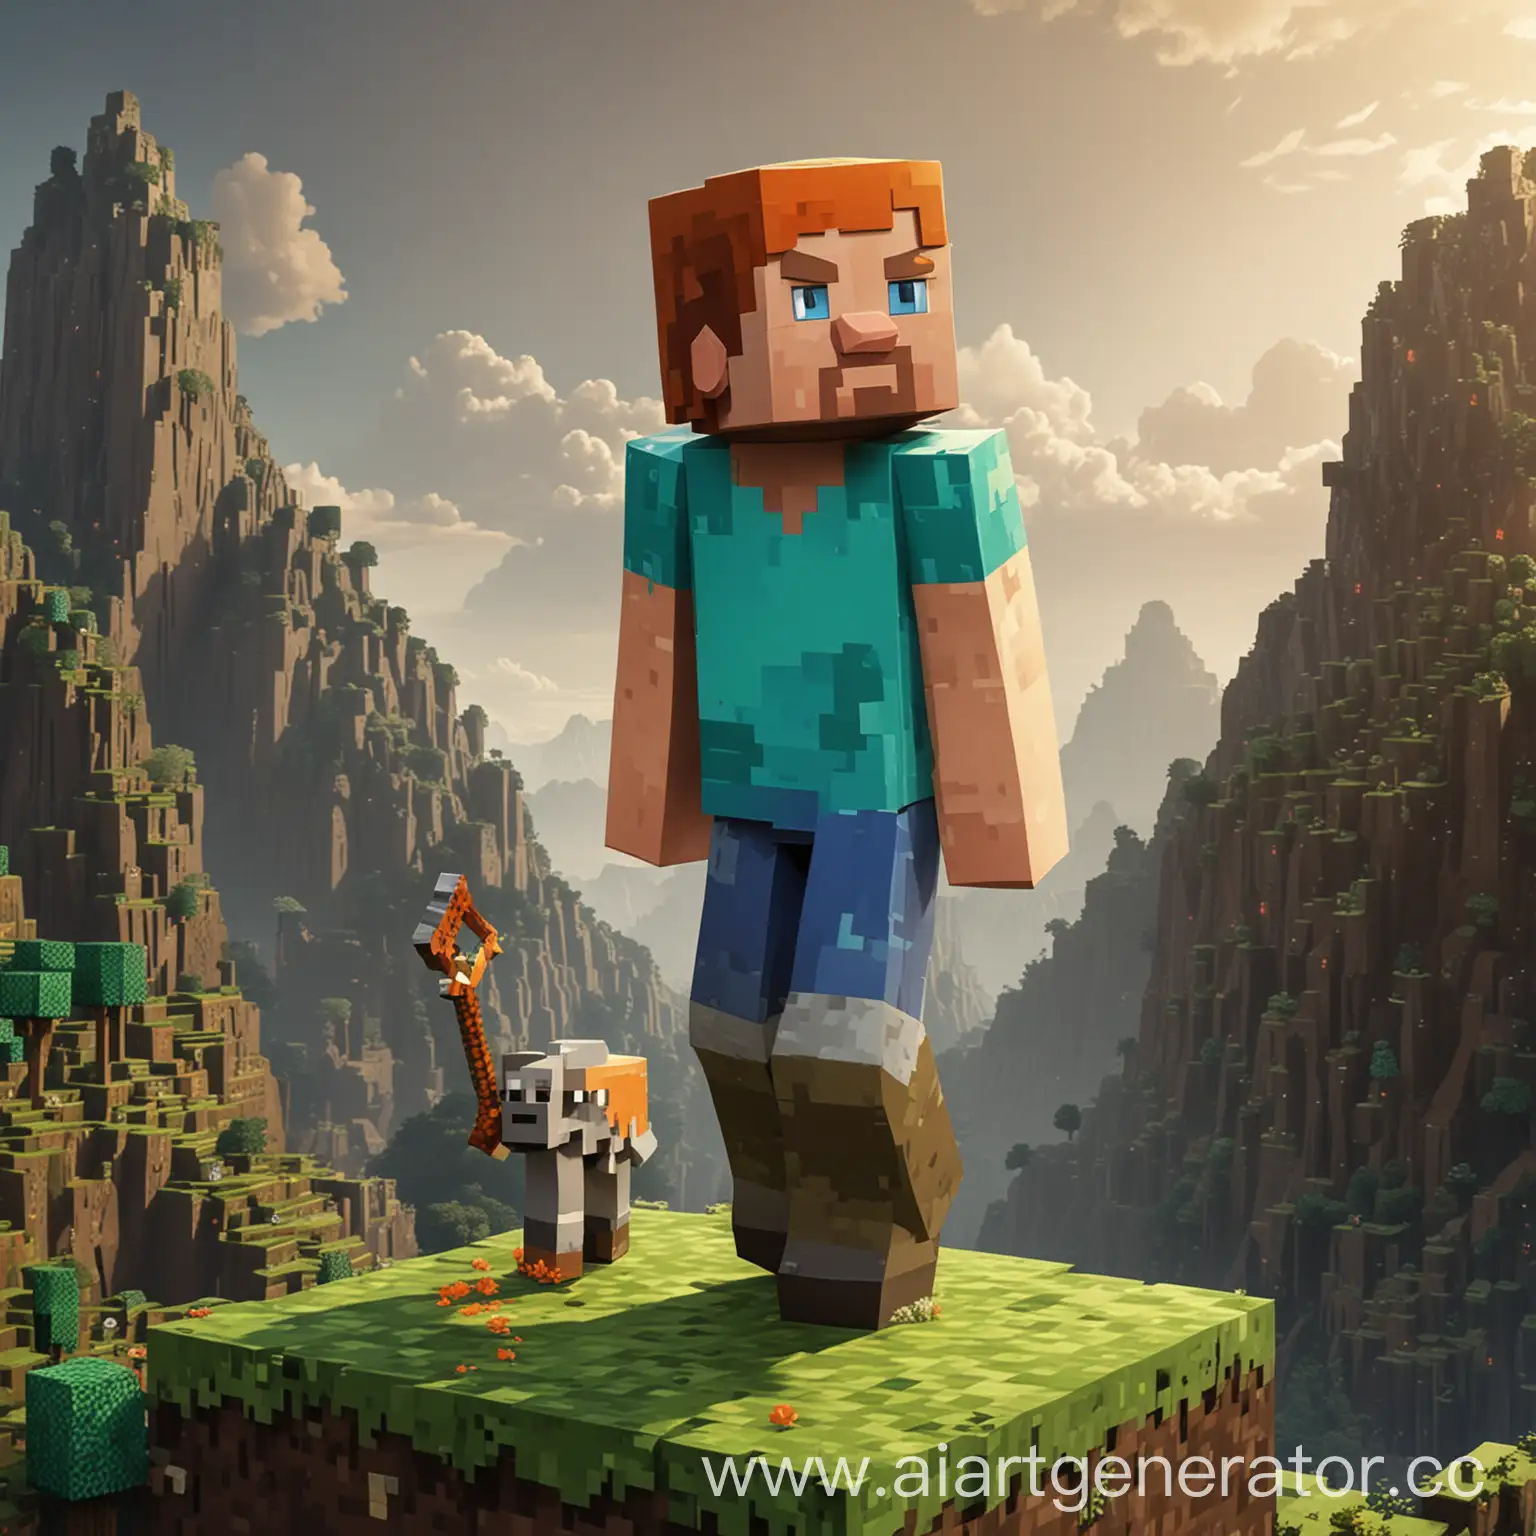 Minecraft-Character-Conquering-the-World-Pixelated-Adventure-and-Exploration